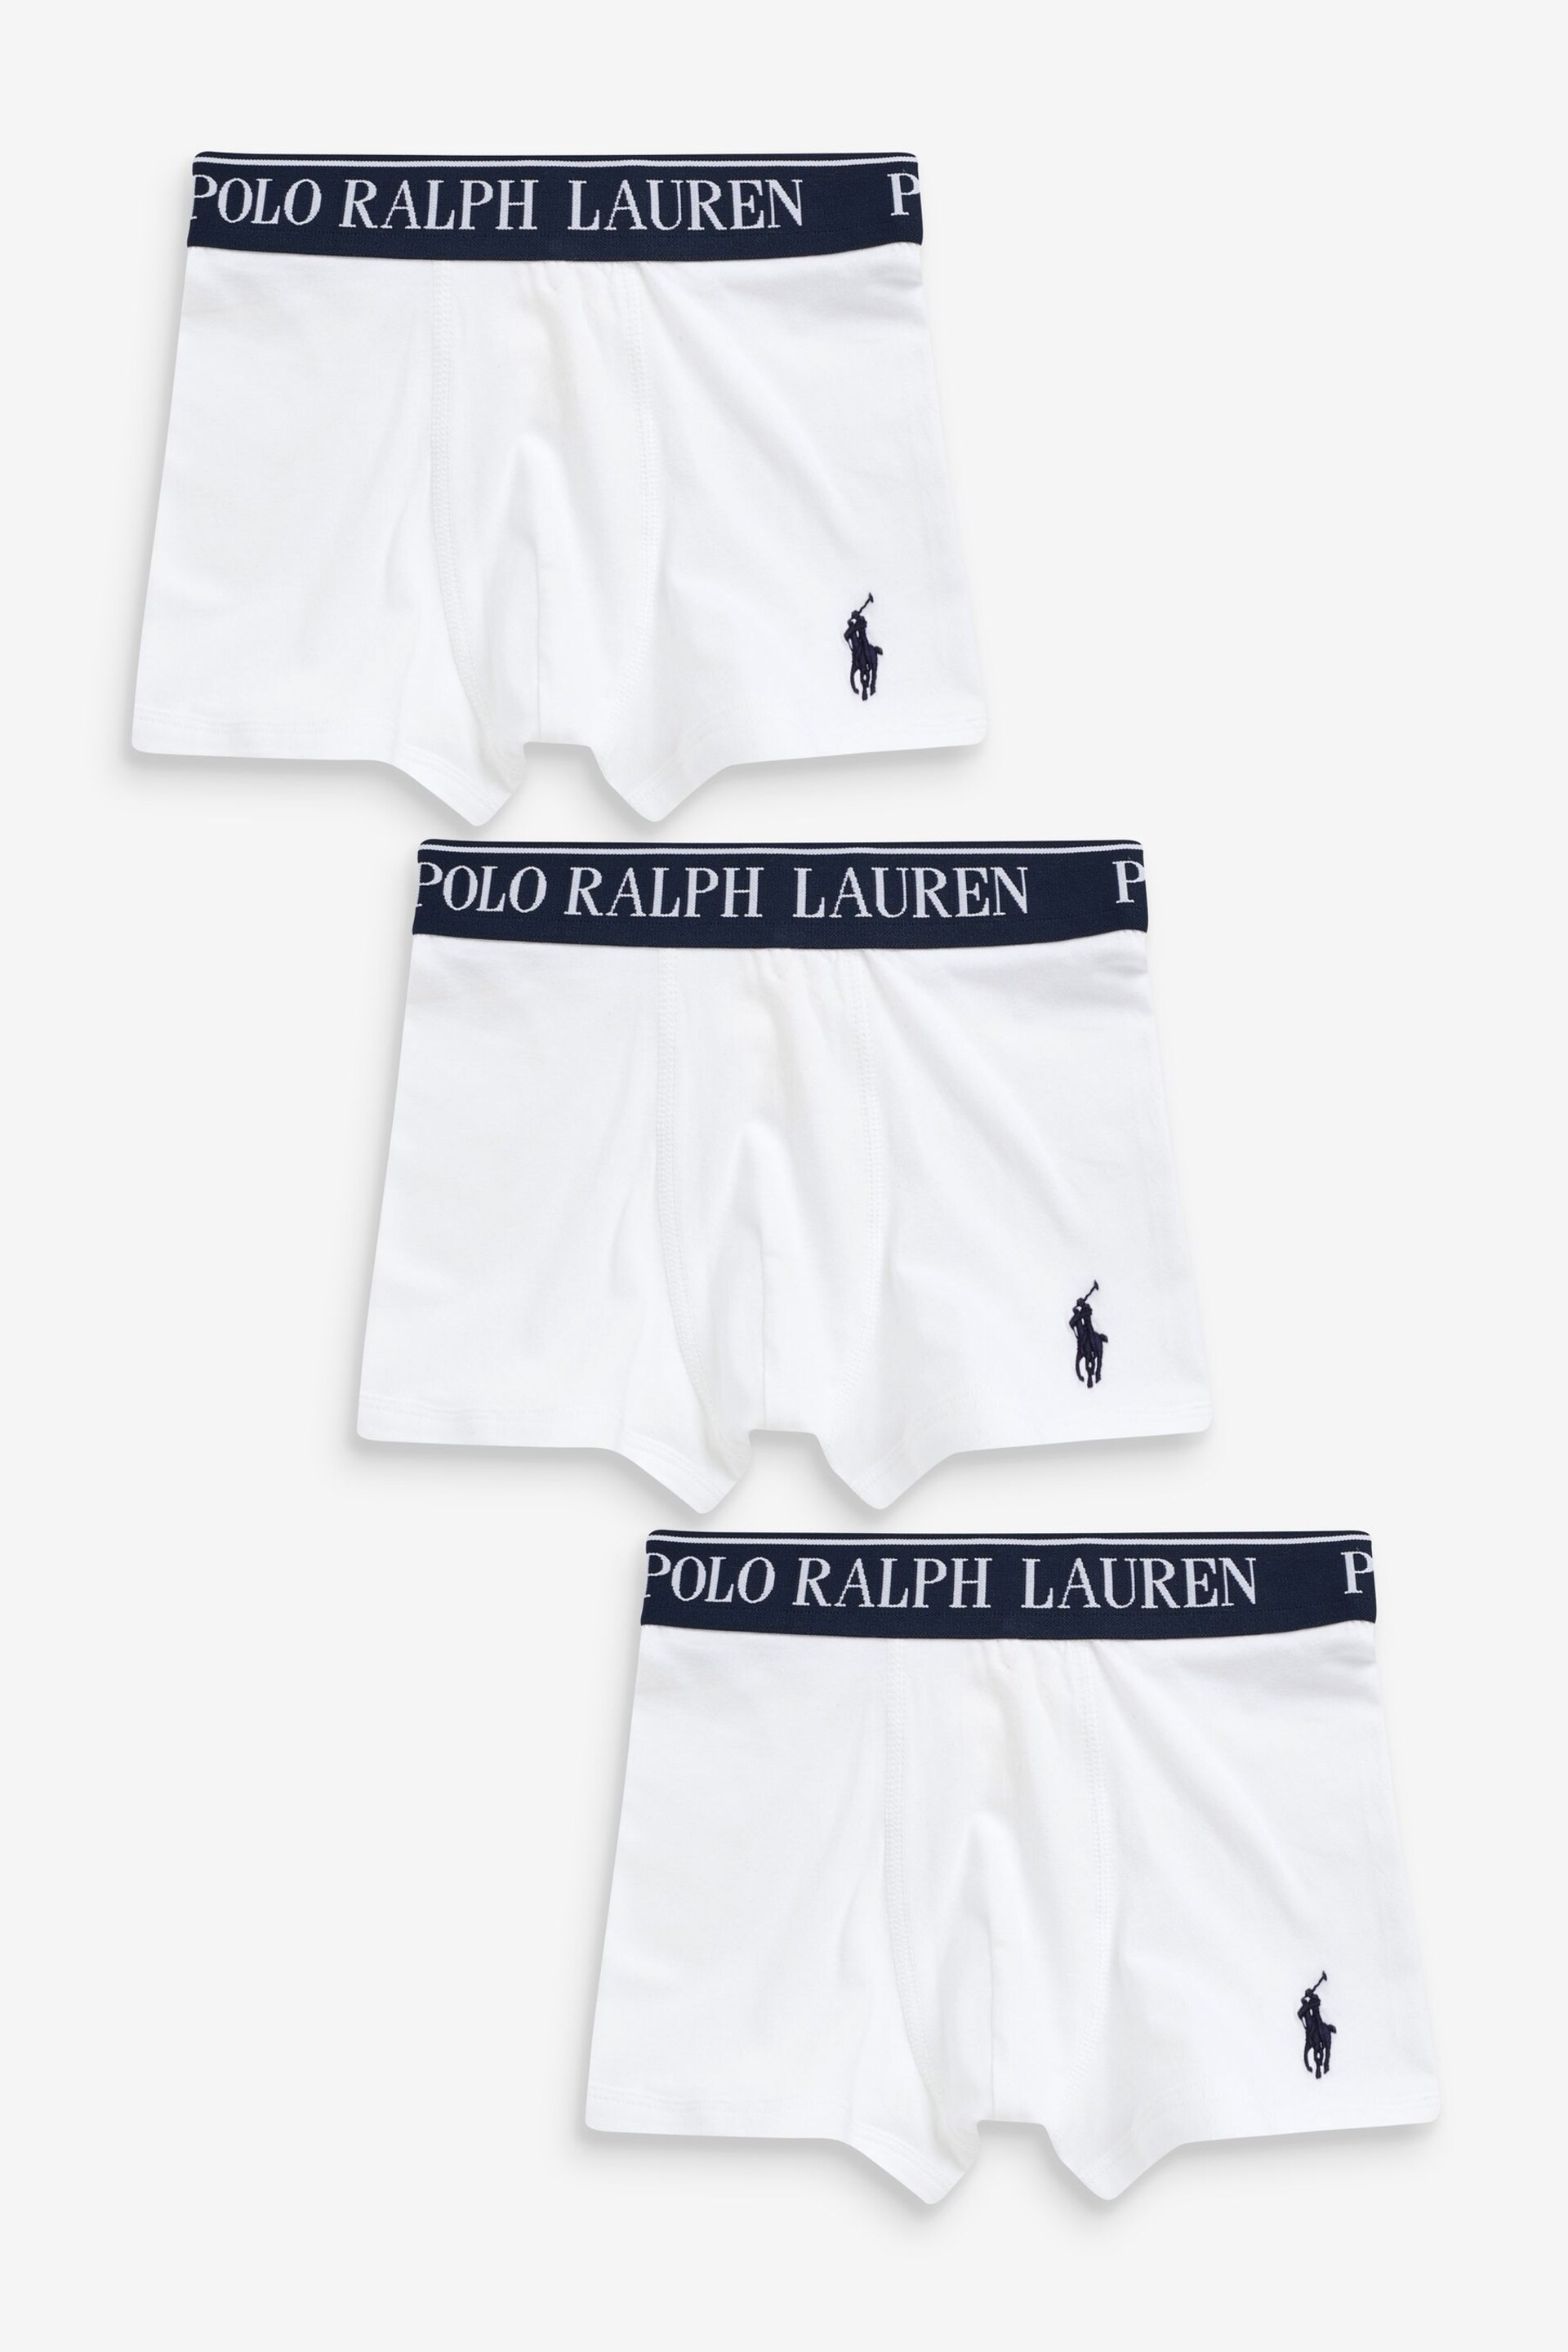 Polo Ralph Lauren Boys White Waistband Boxers 3 Pack - Image 1 of 4